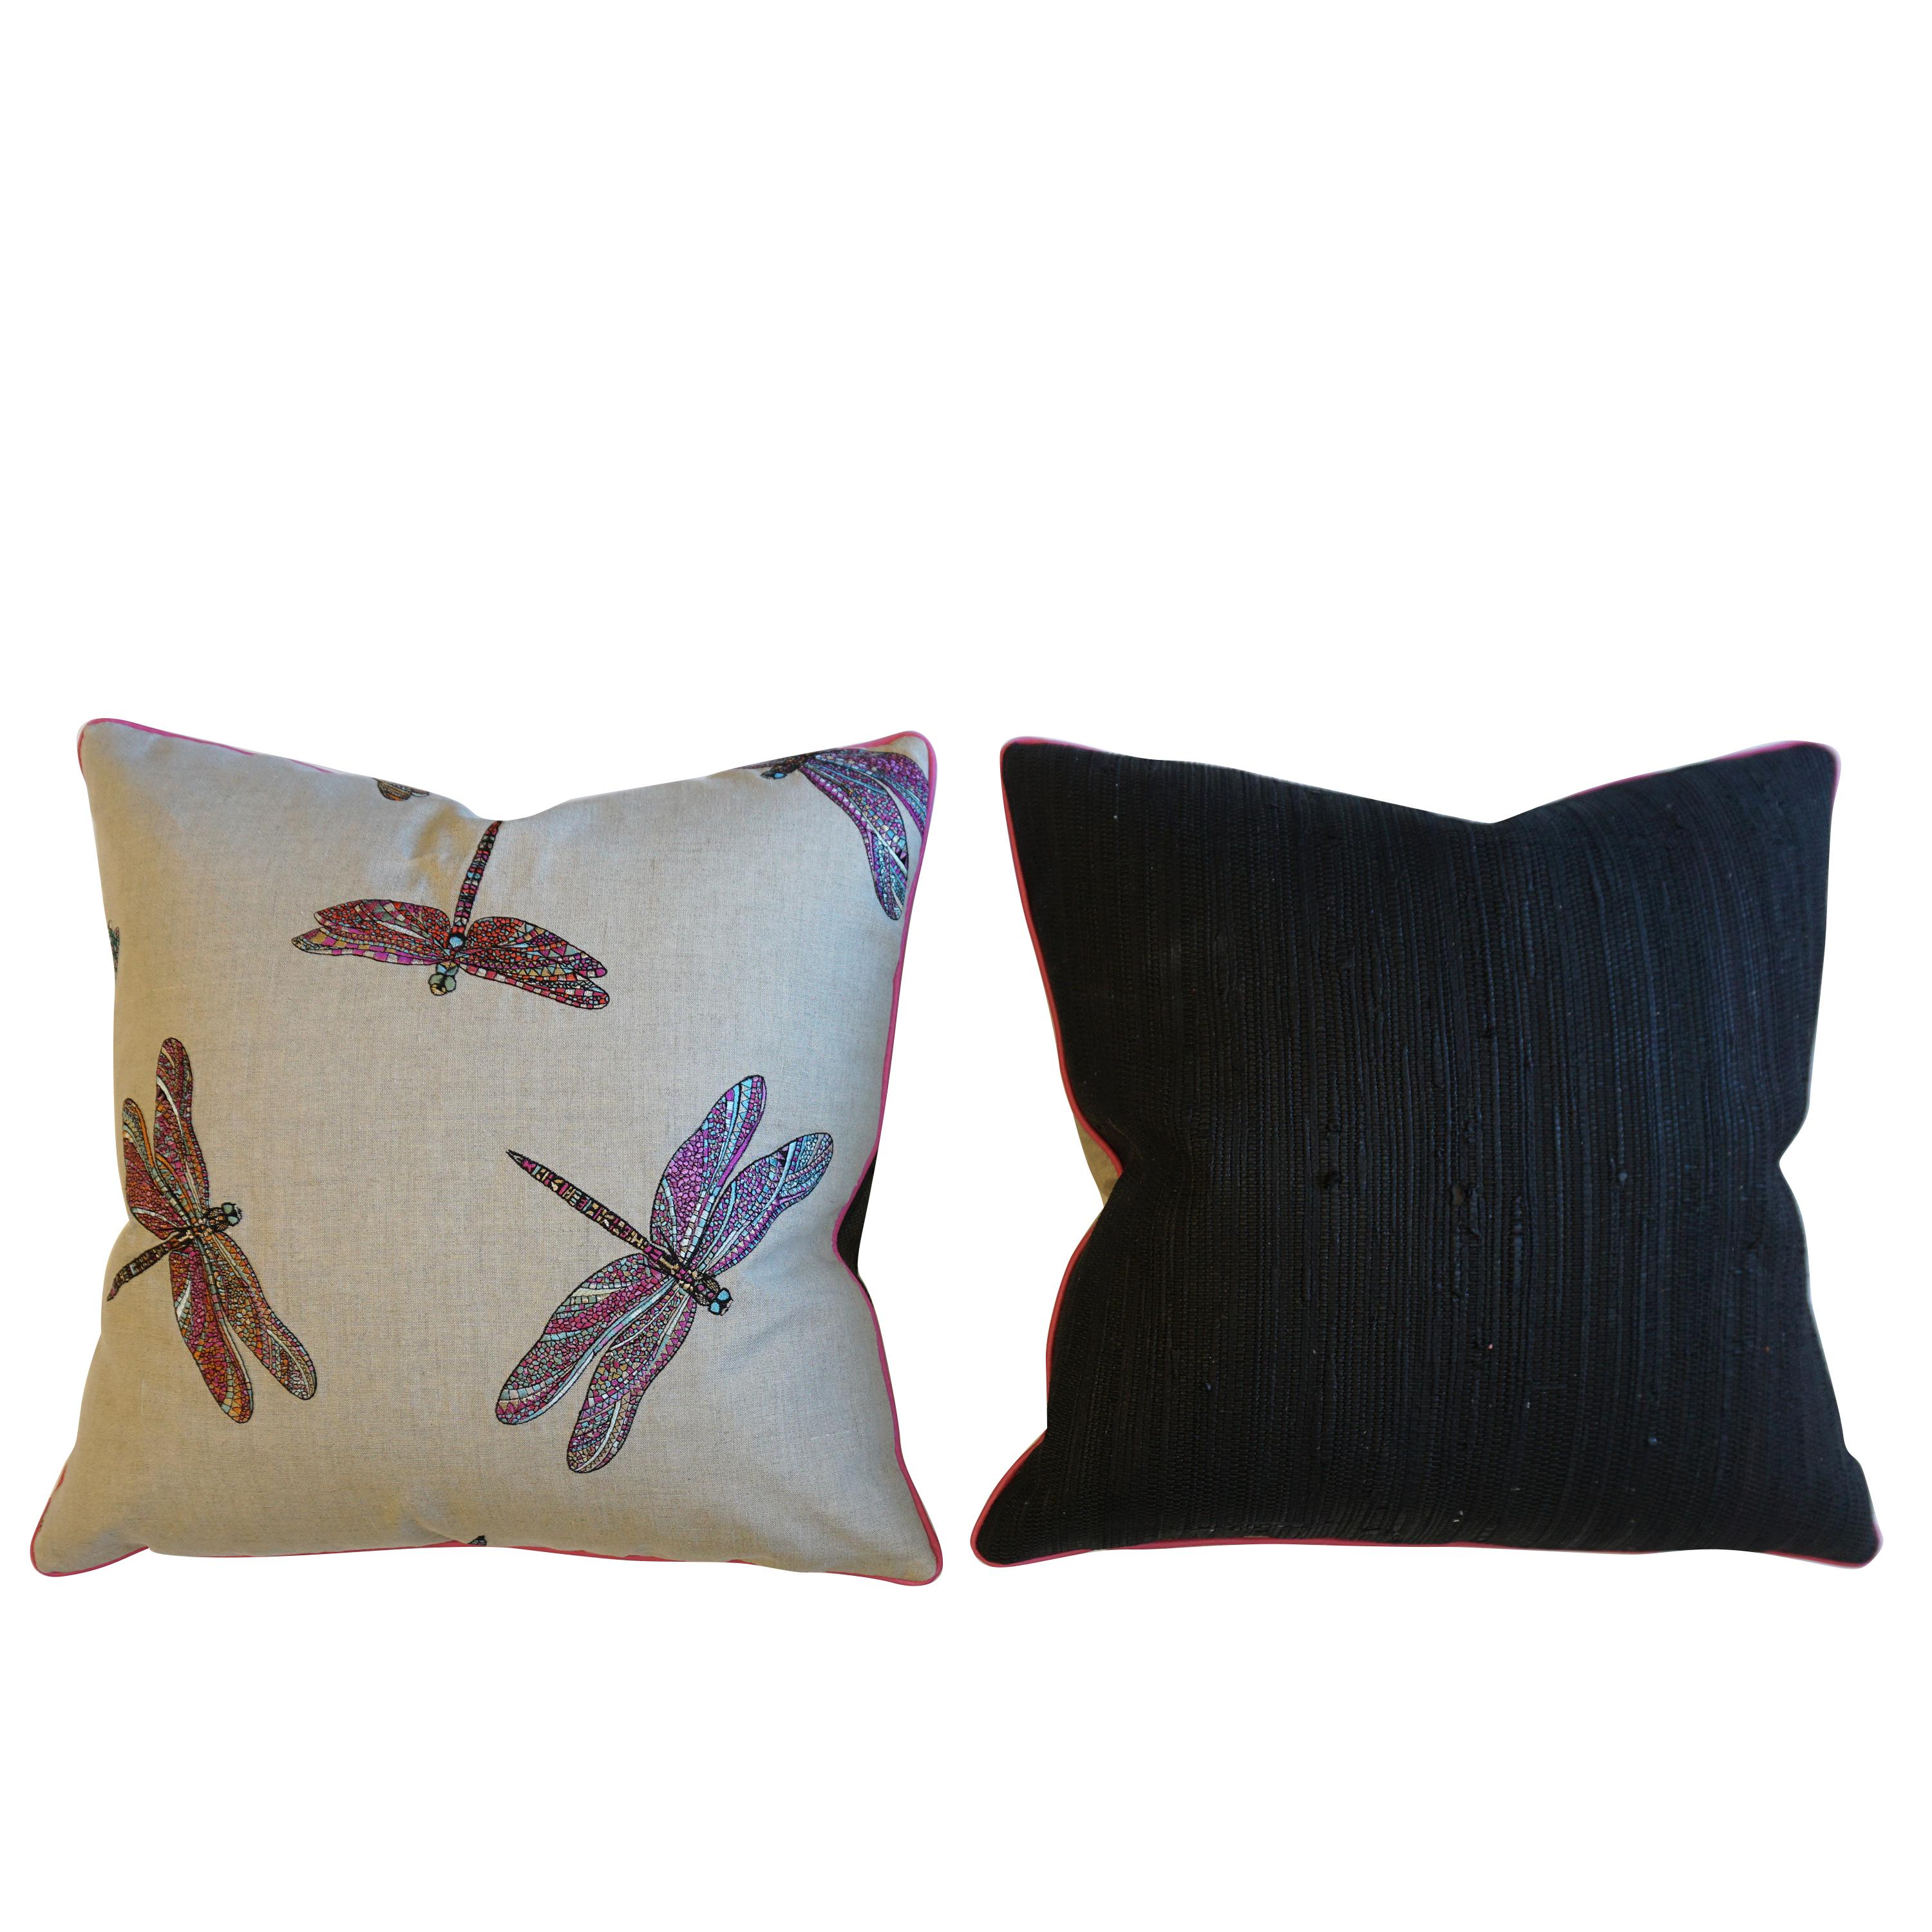 American Dragonfly Embroidered Throw Pillows